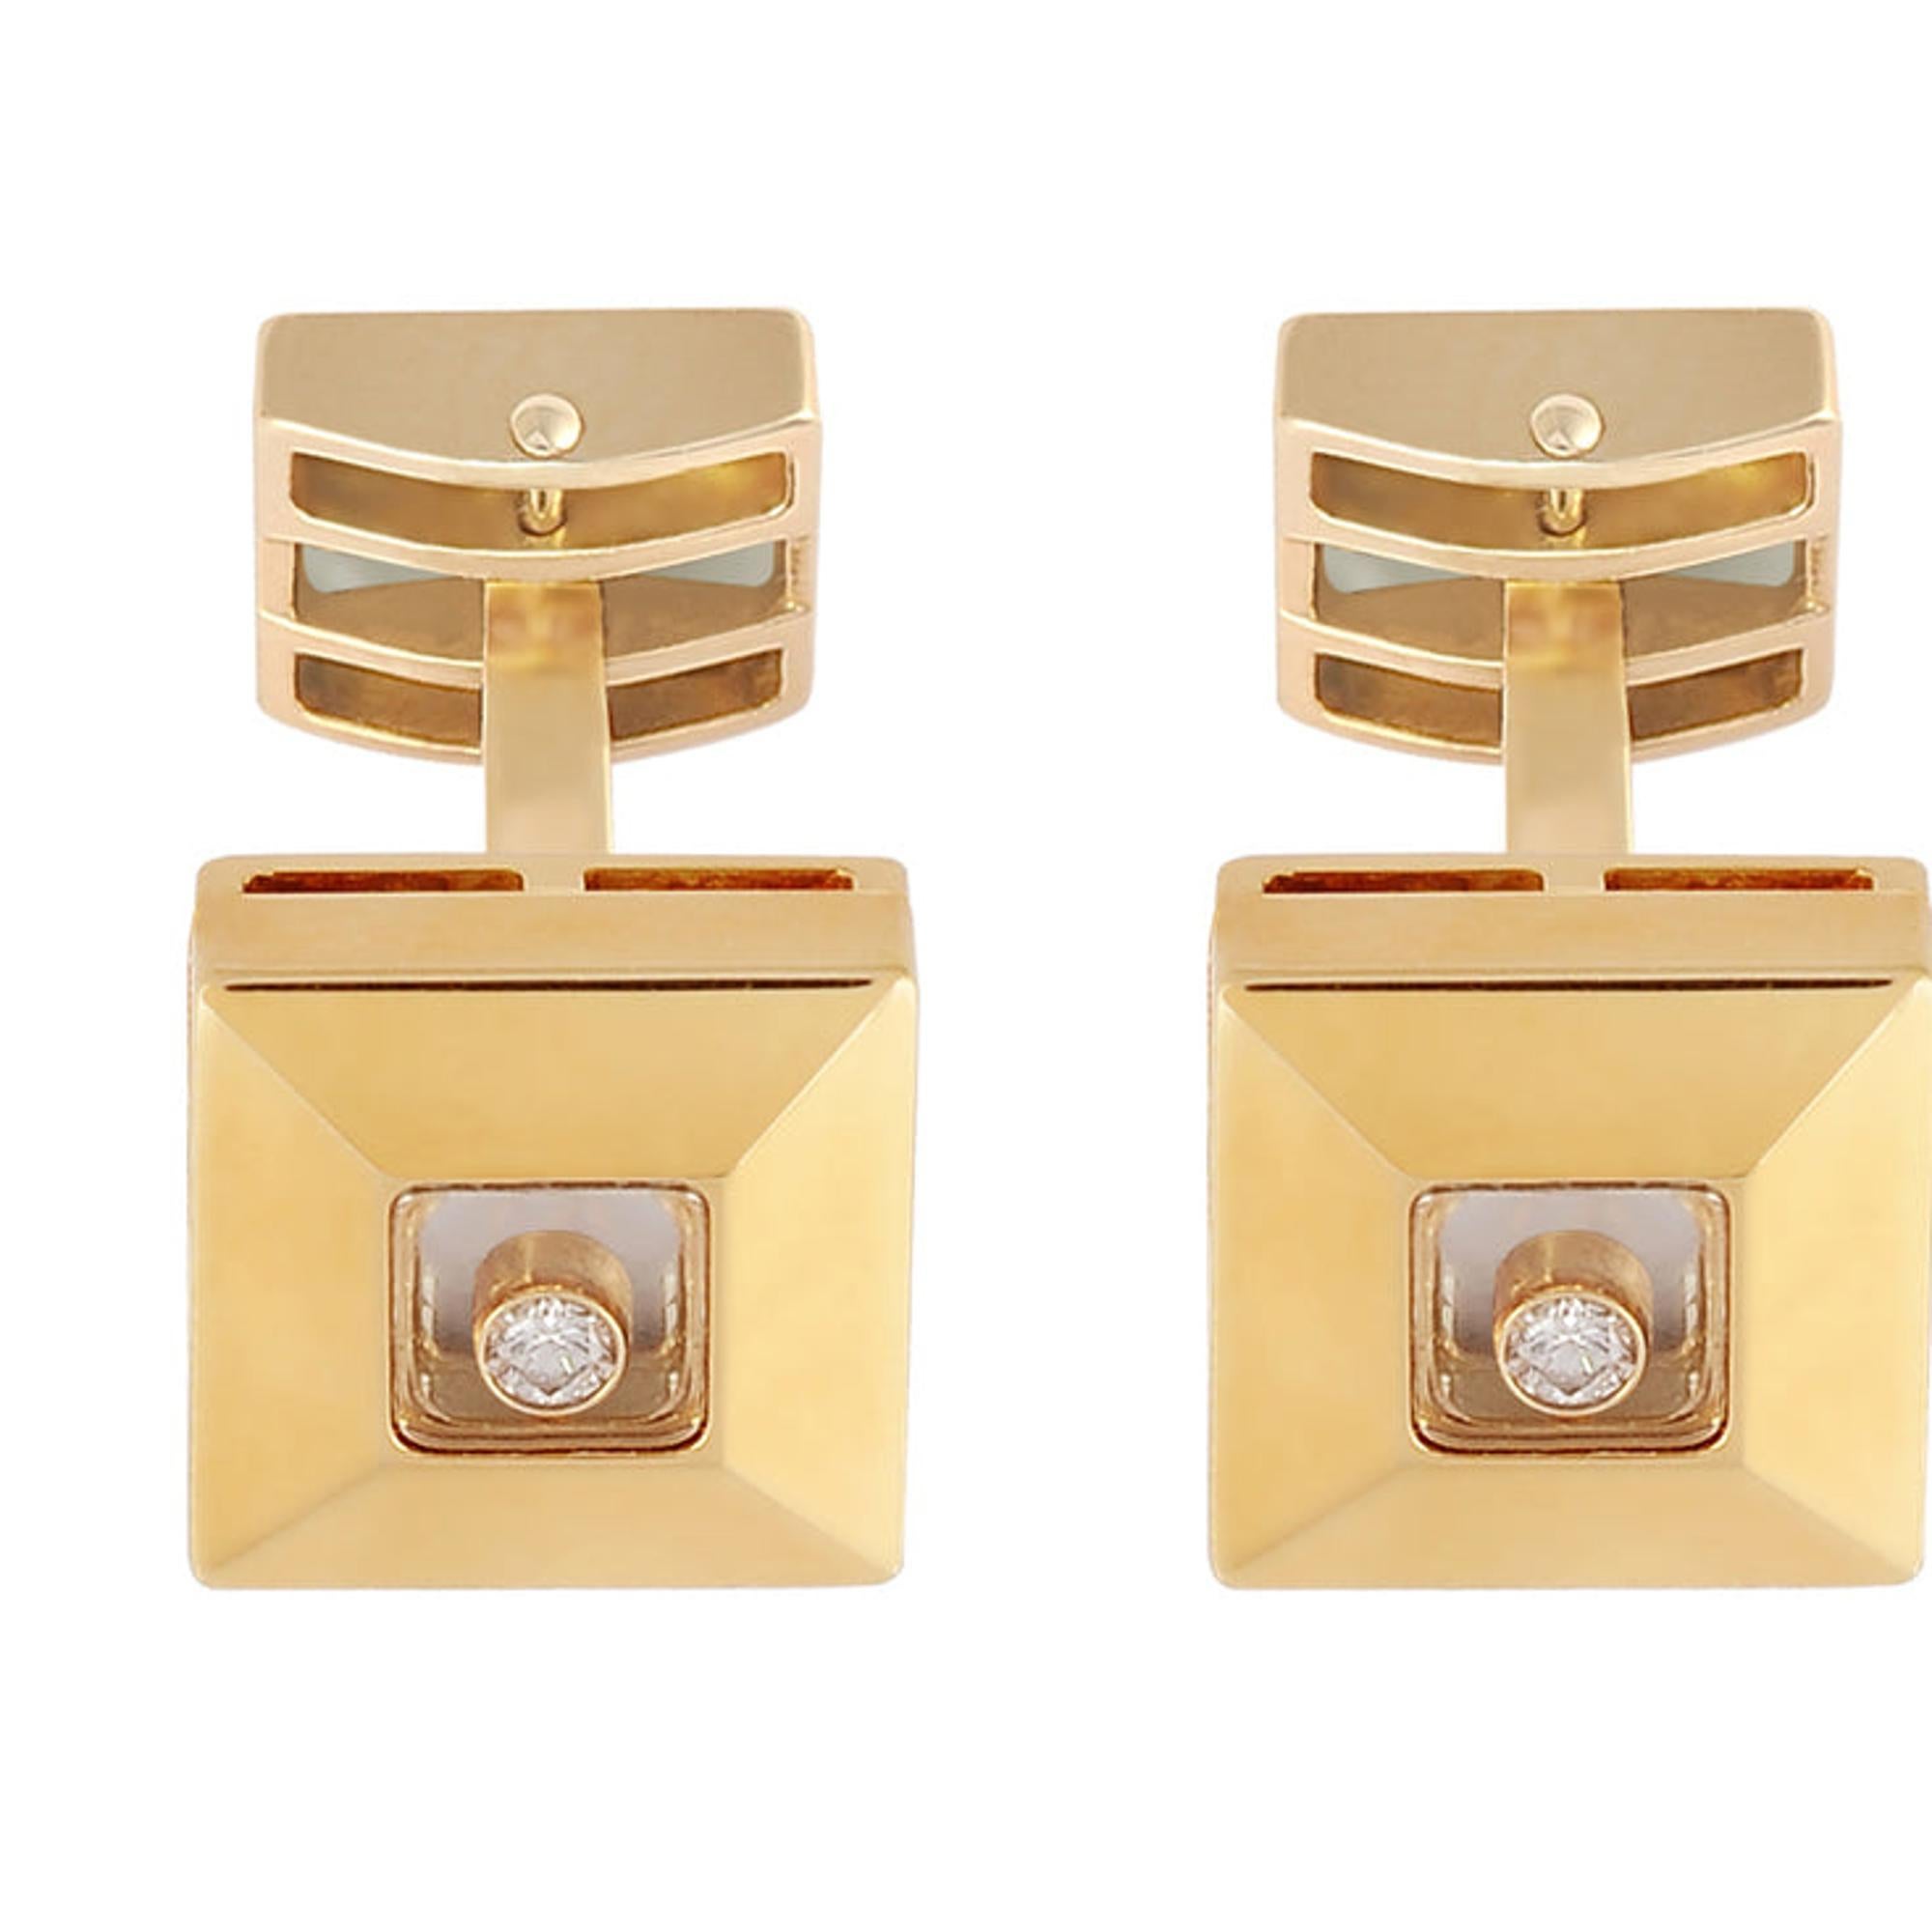 Stunning Chopard Happy square diamond cufflinks, crafted in 18K yellow gold. As they say, diamonds are happy when they are set free; this statement piece is set with a suspended playful round cut diamond weighing 0.06cttw behind a glass panel. Size